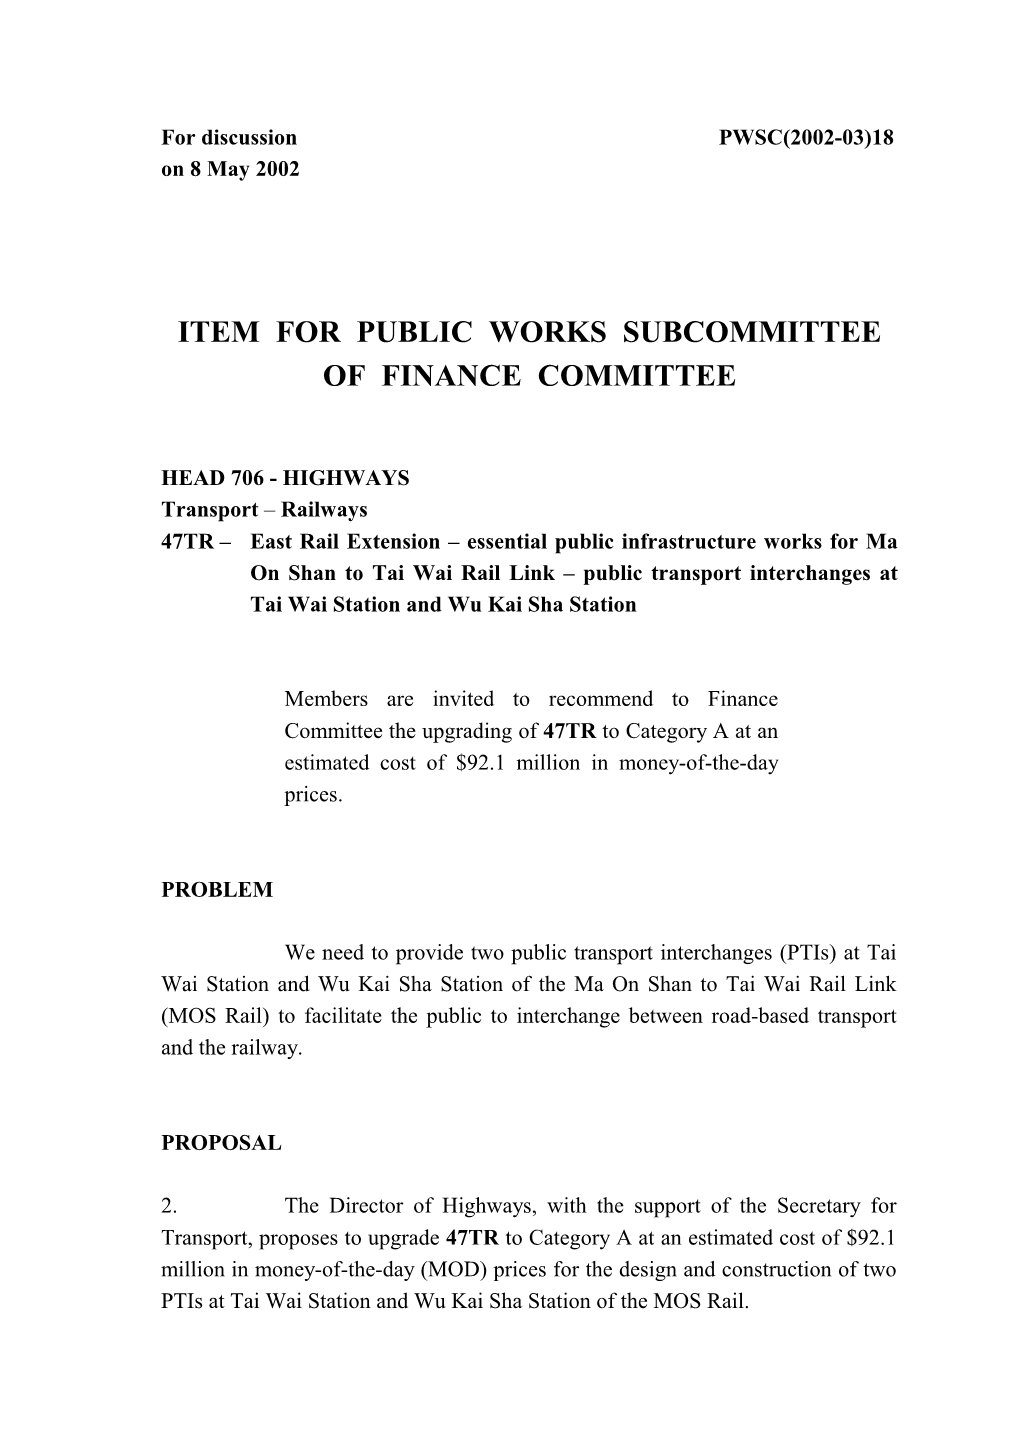 Paper on the Proposed Ptis to the Legco Panel on Transport on 26 April 2002 and Members Noted the Proposal at the Meeting